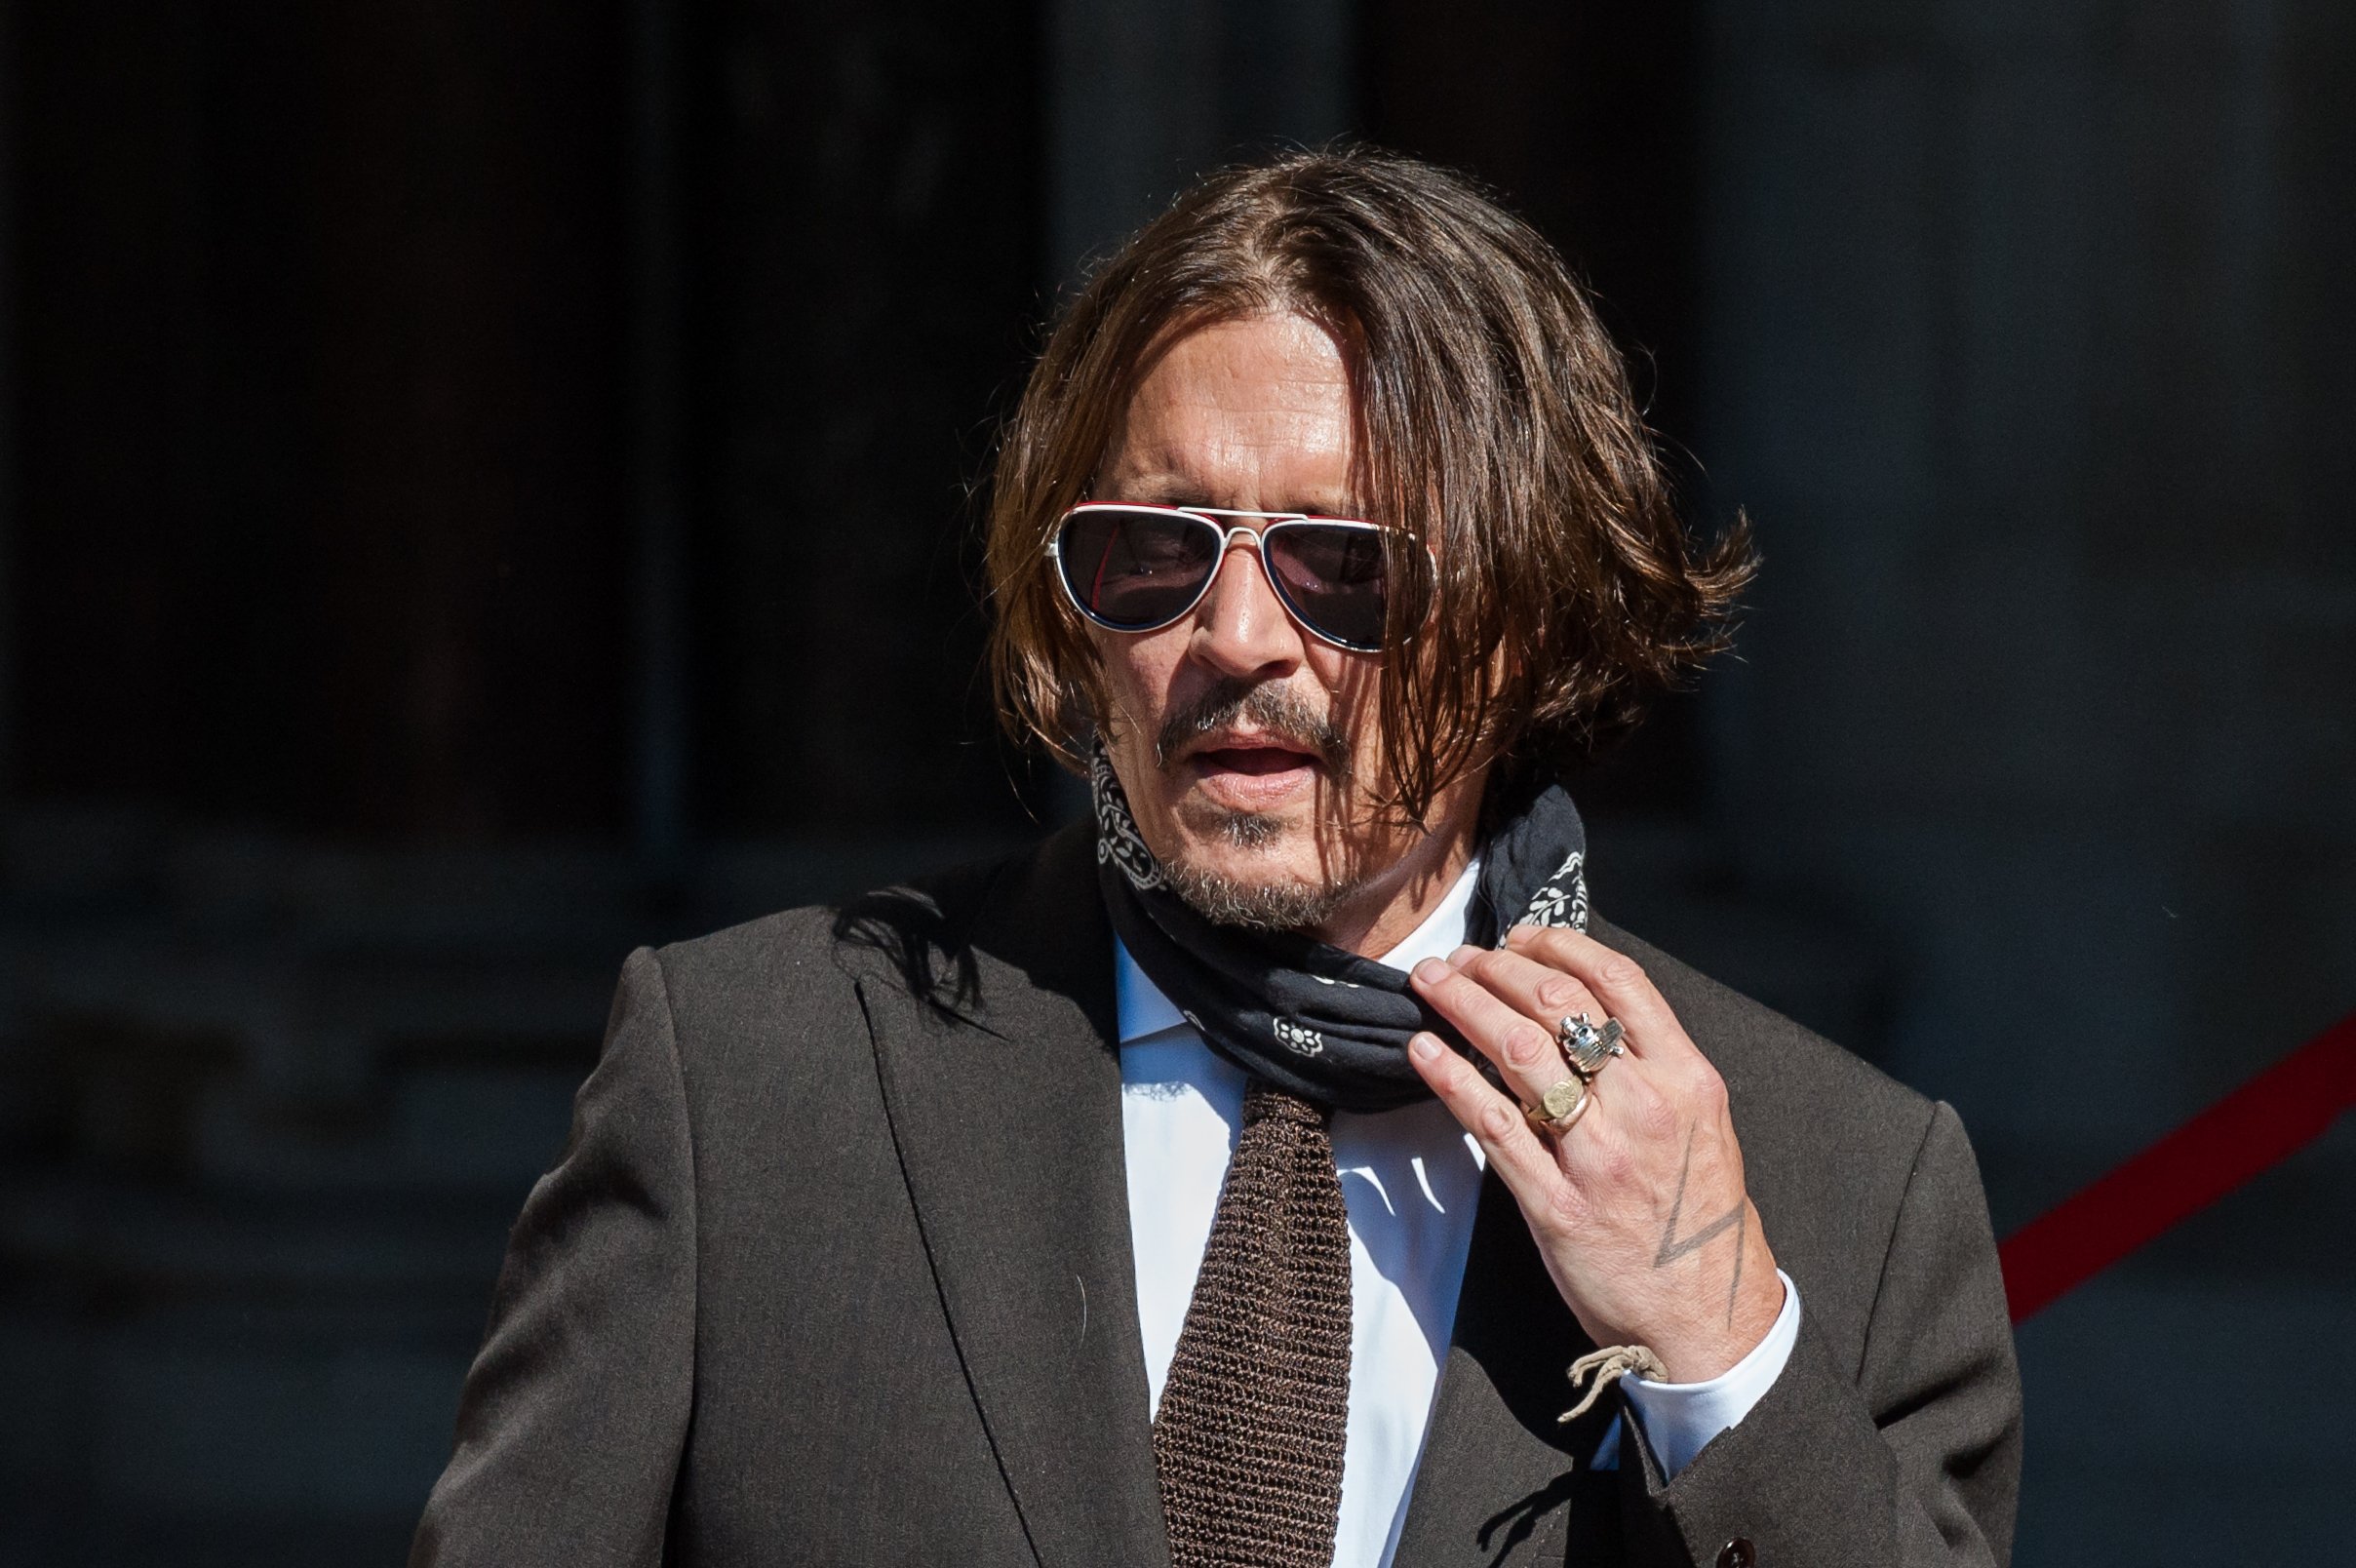 Johnny Depp at the Royal Courts of Justice during his libel case against The Sun newspaper on July 10, 2020, in London, England. | Source: Getty Images